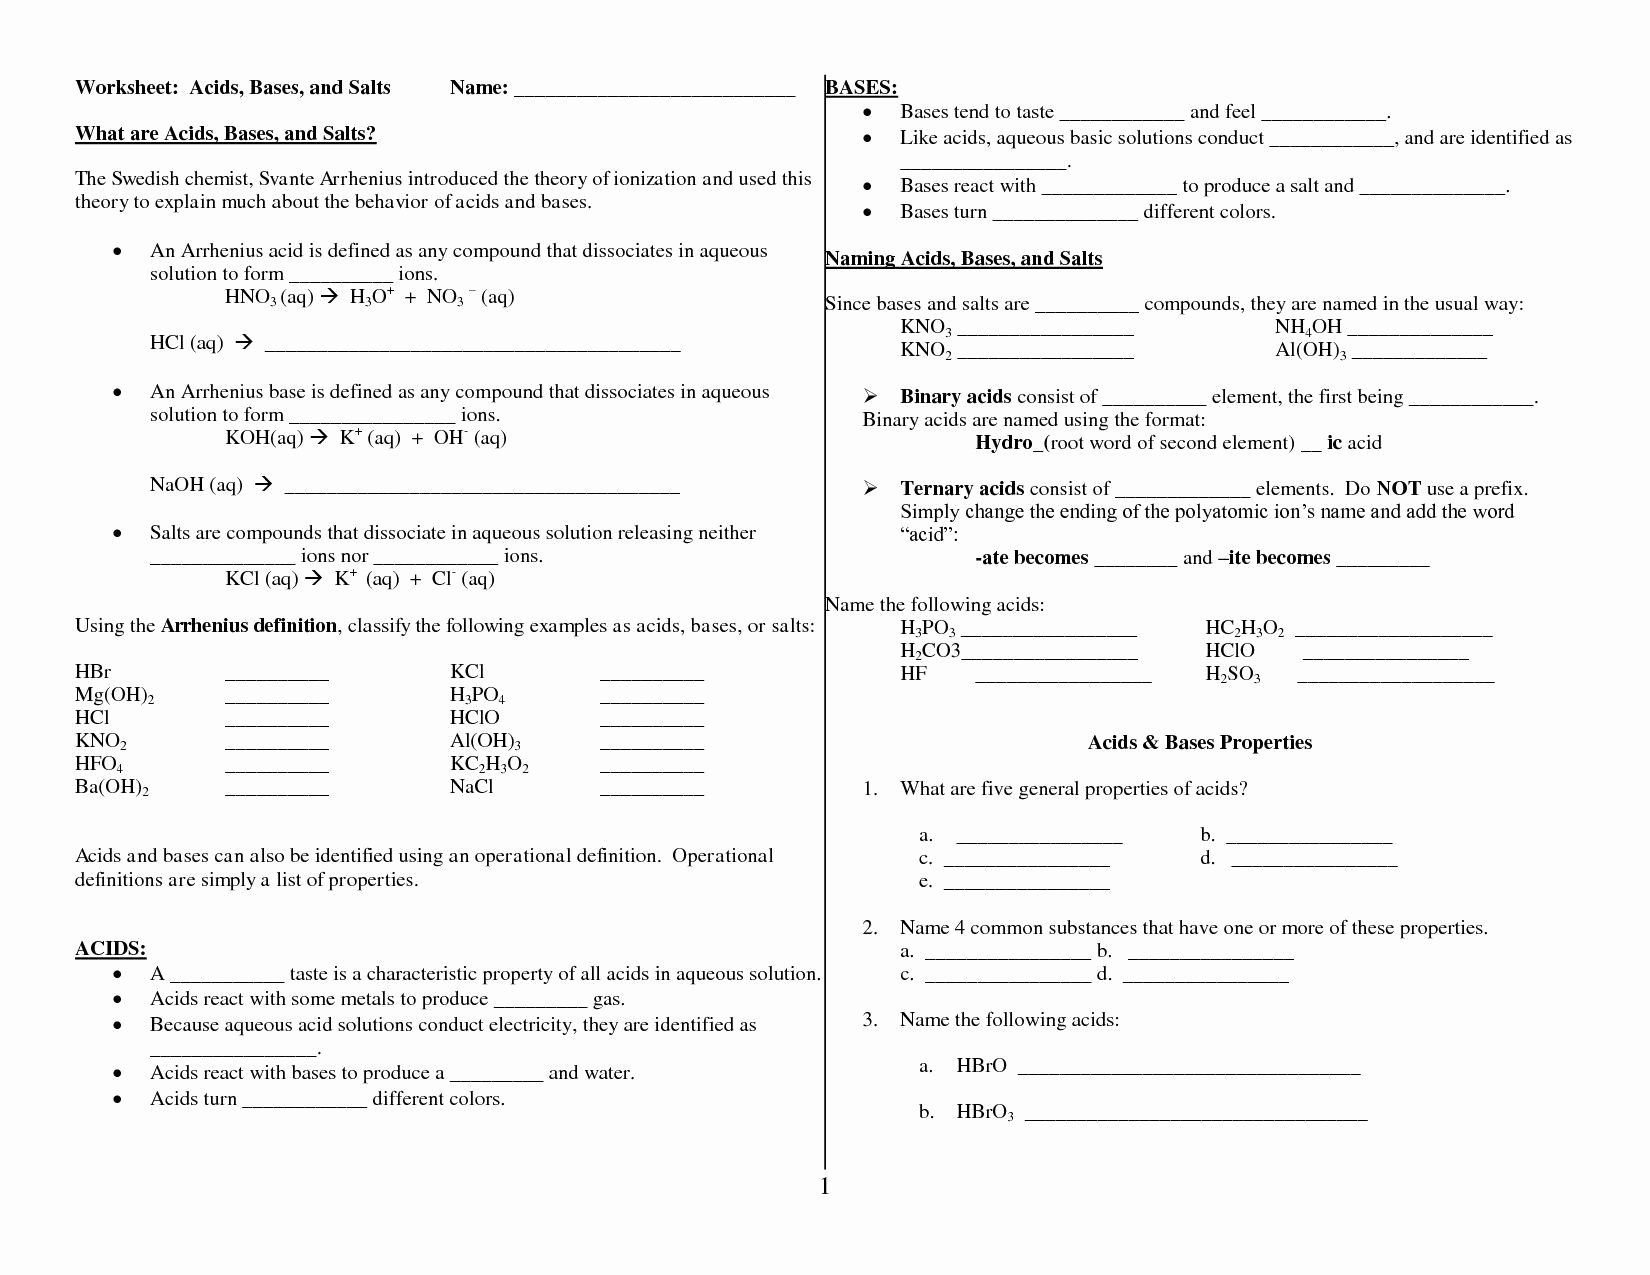 Solutions Acids and Bases Worksheet Beautiful Acids Bases and solutions Worksheet